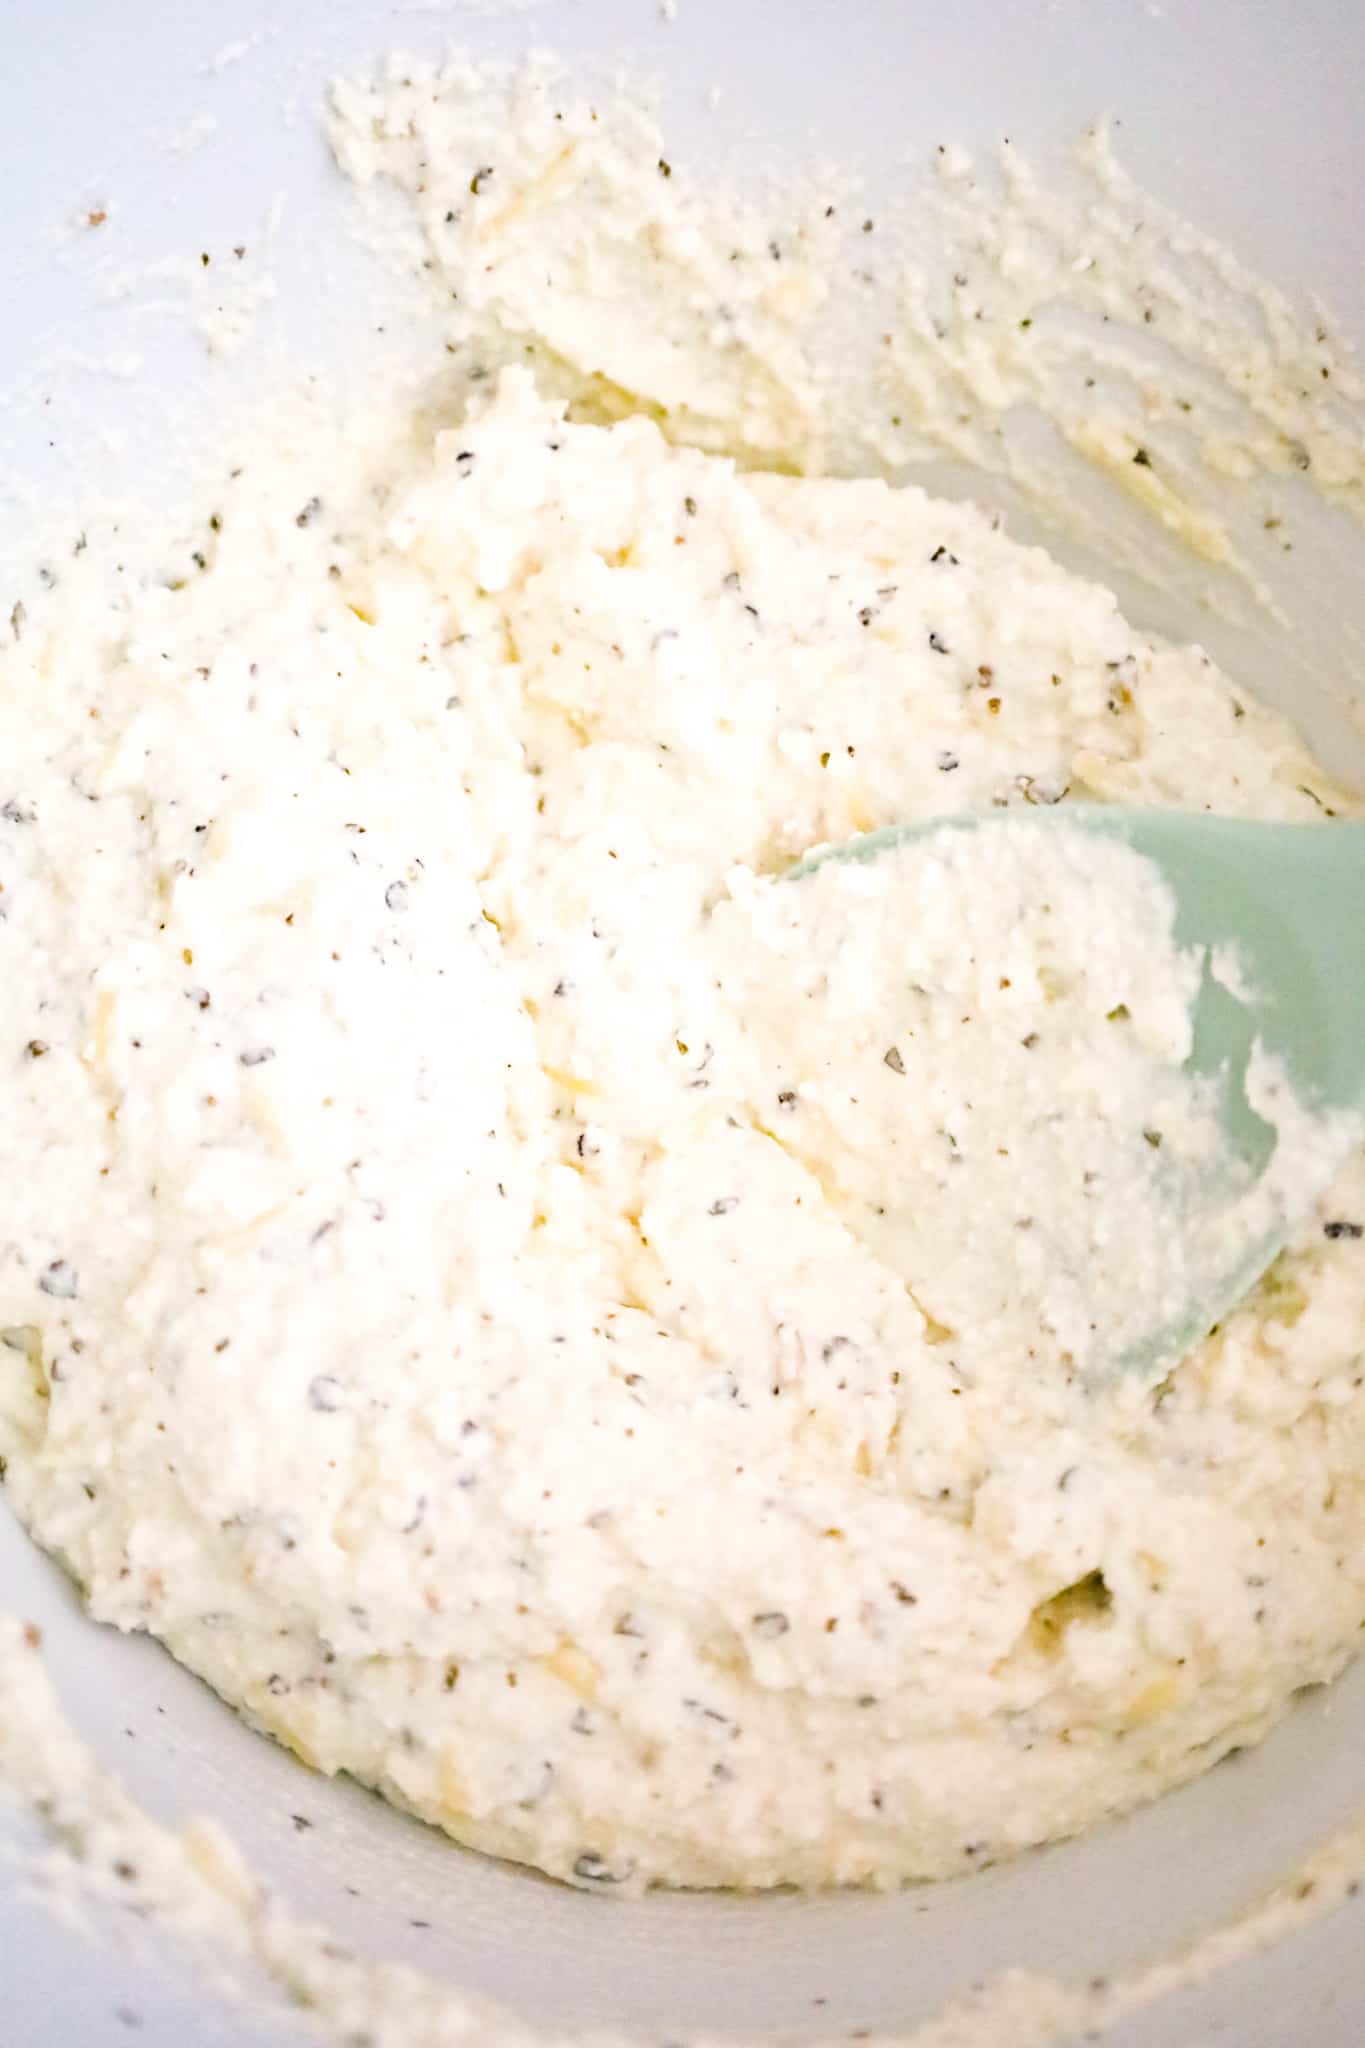 sour cream and ricotta mixture in a mixing bowl